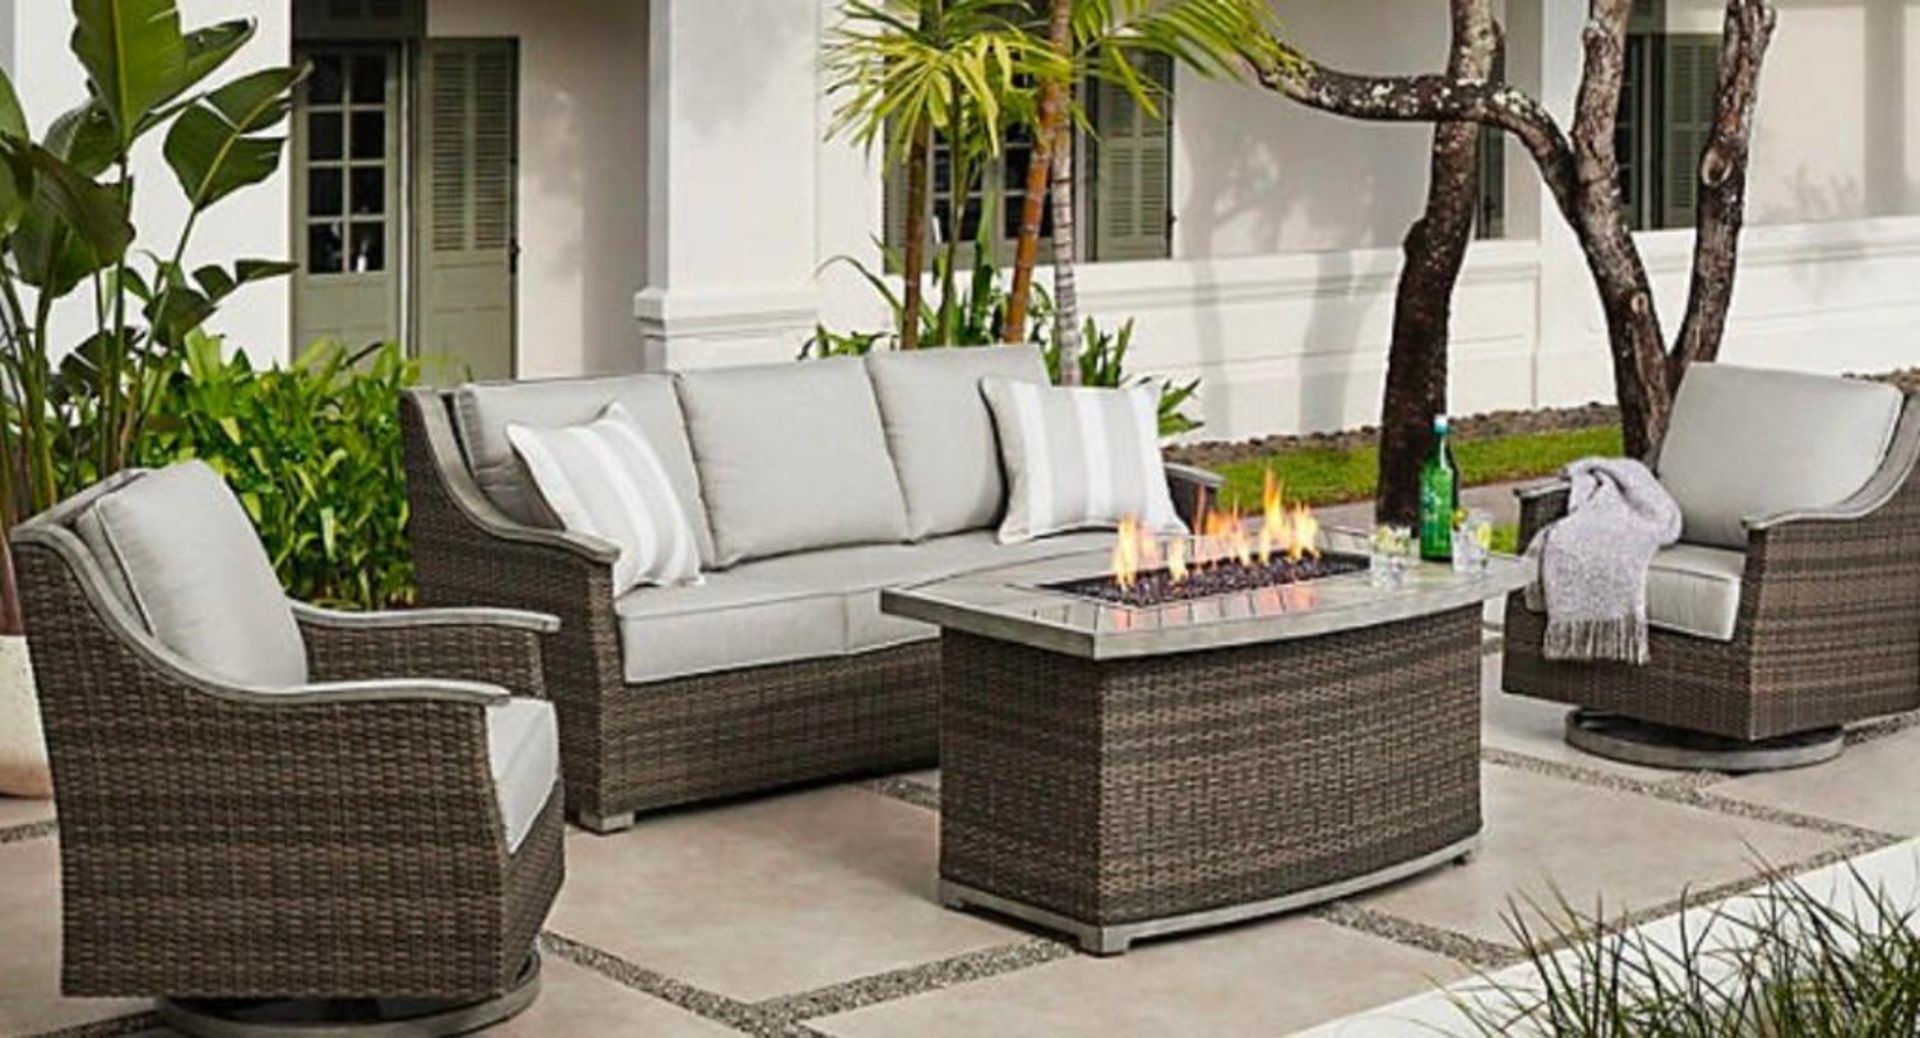 Grill, outdoor seating set, TV console